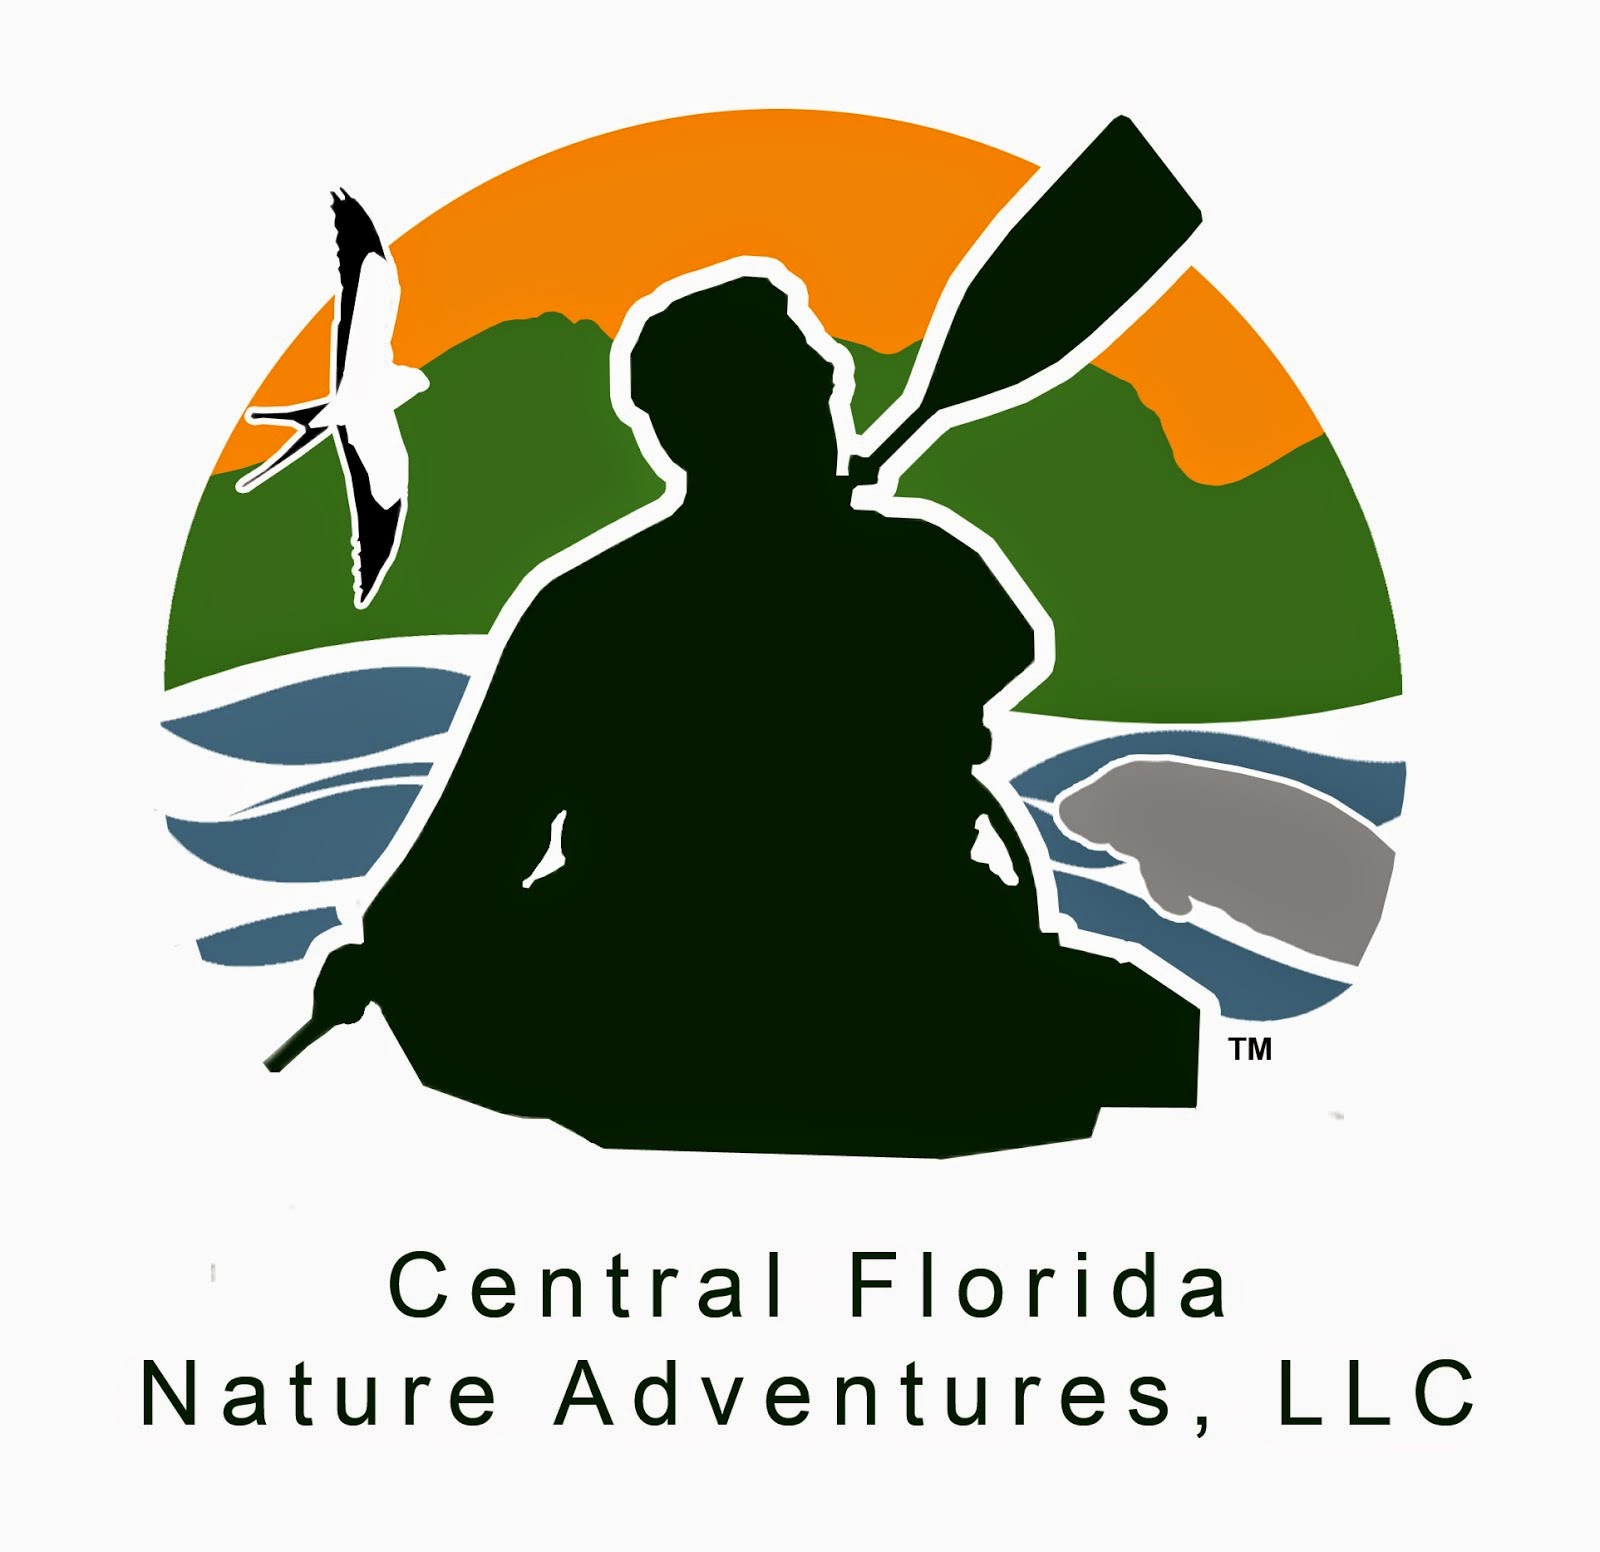 Our Guided Kayak Tour Service